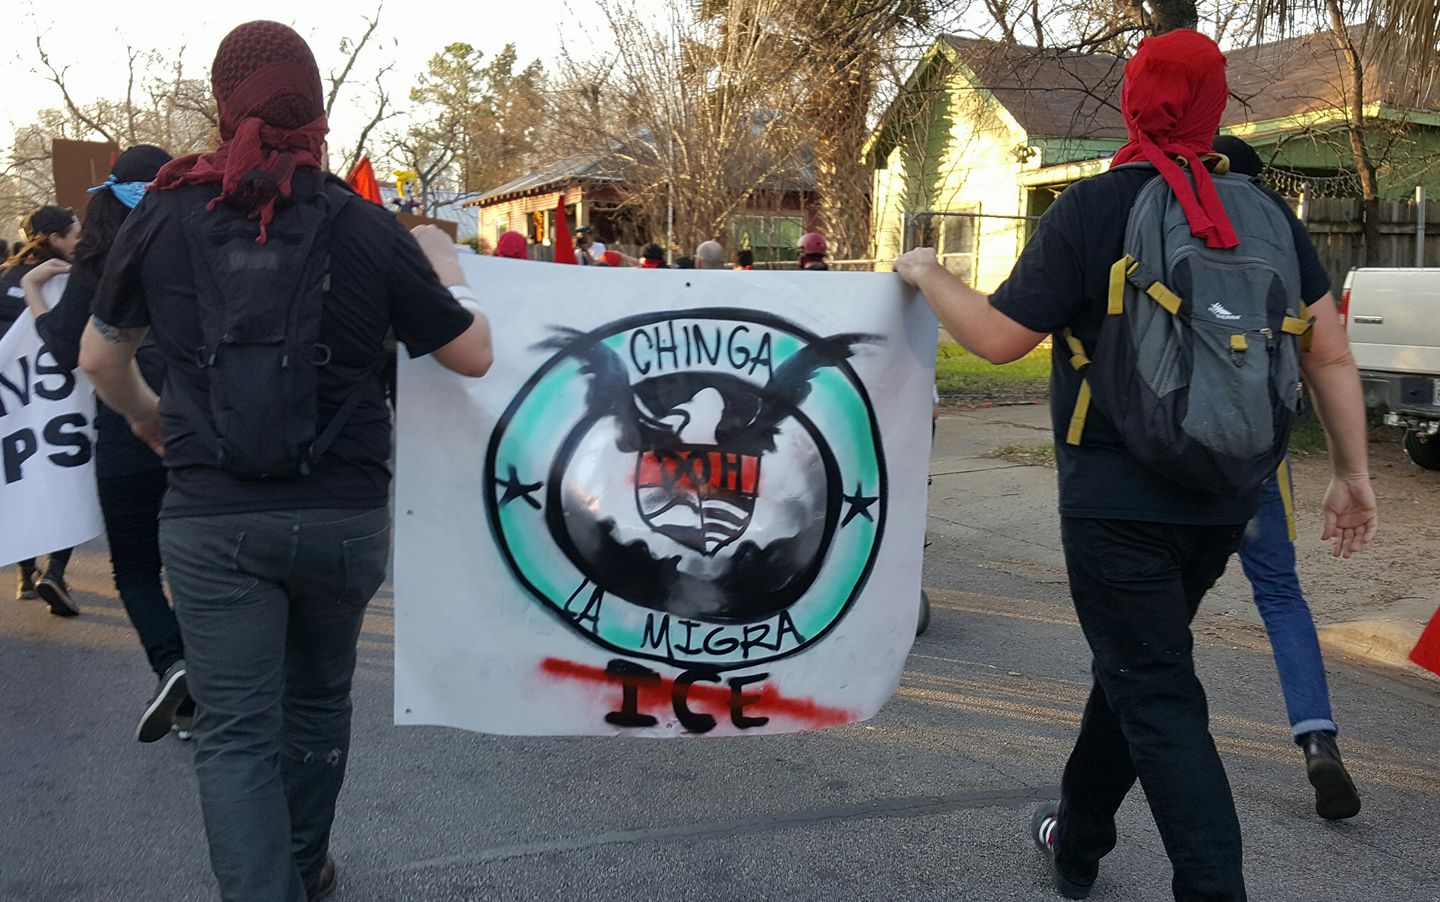 PHOTO: Two protesters in Austin carry a sign in opposition to the recent ICE raids. Photo courtesy of Kit O'Connell.